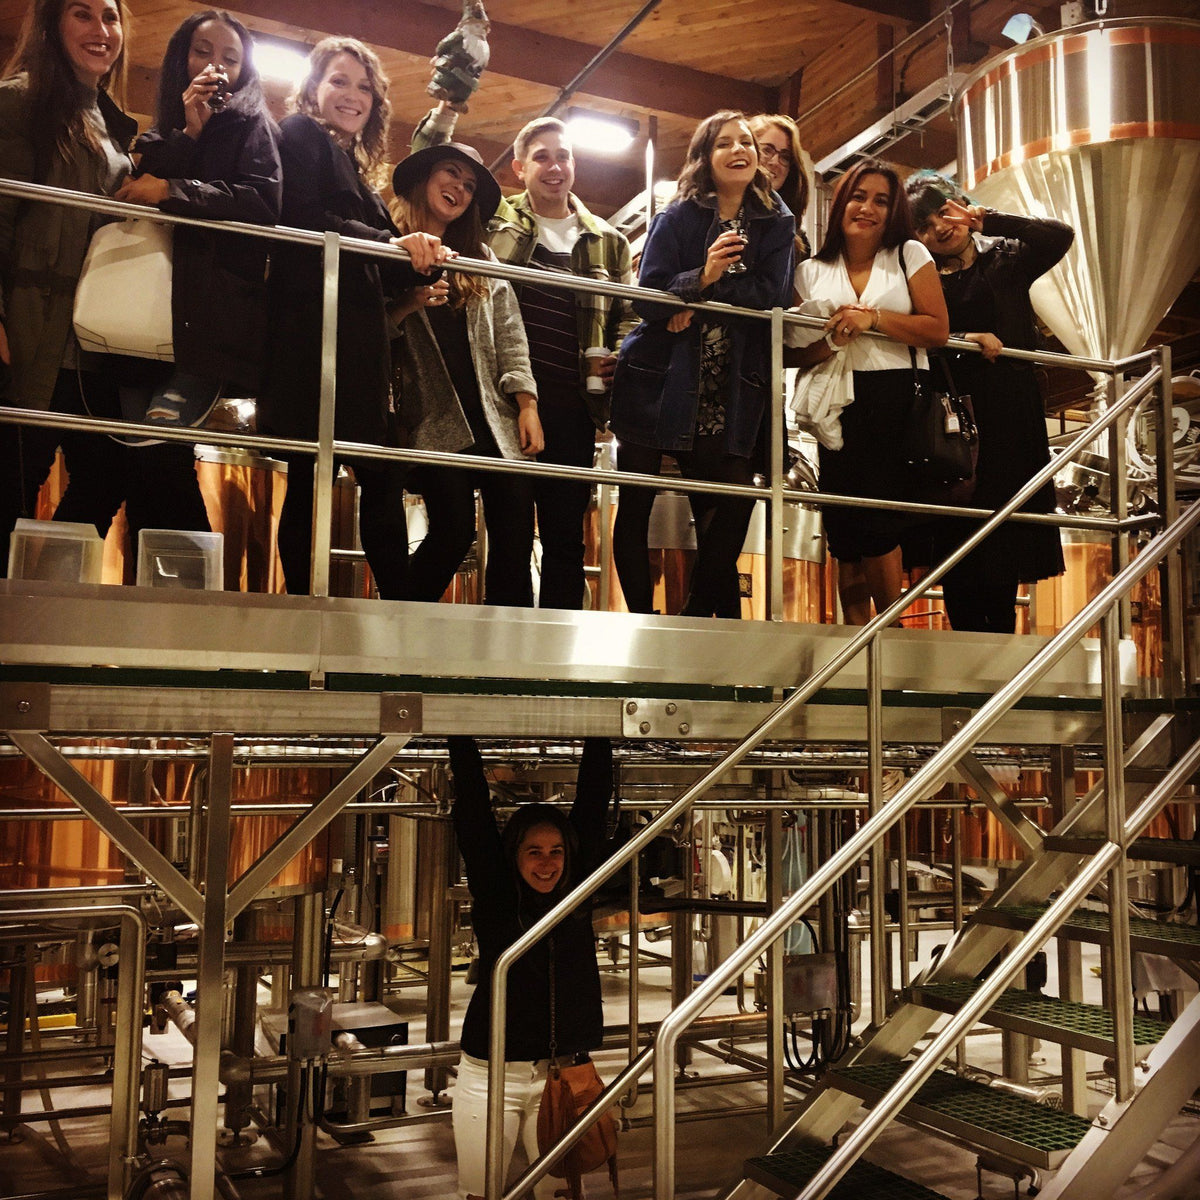 Vancouver Brewery Based Tours